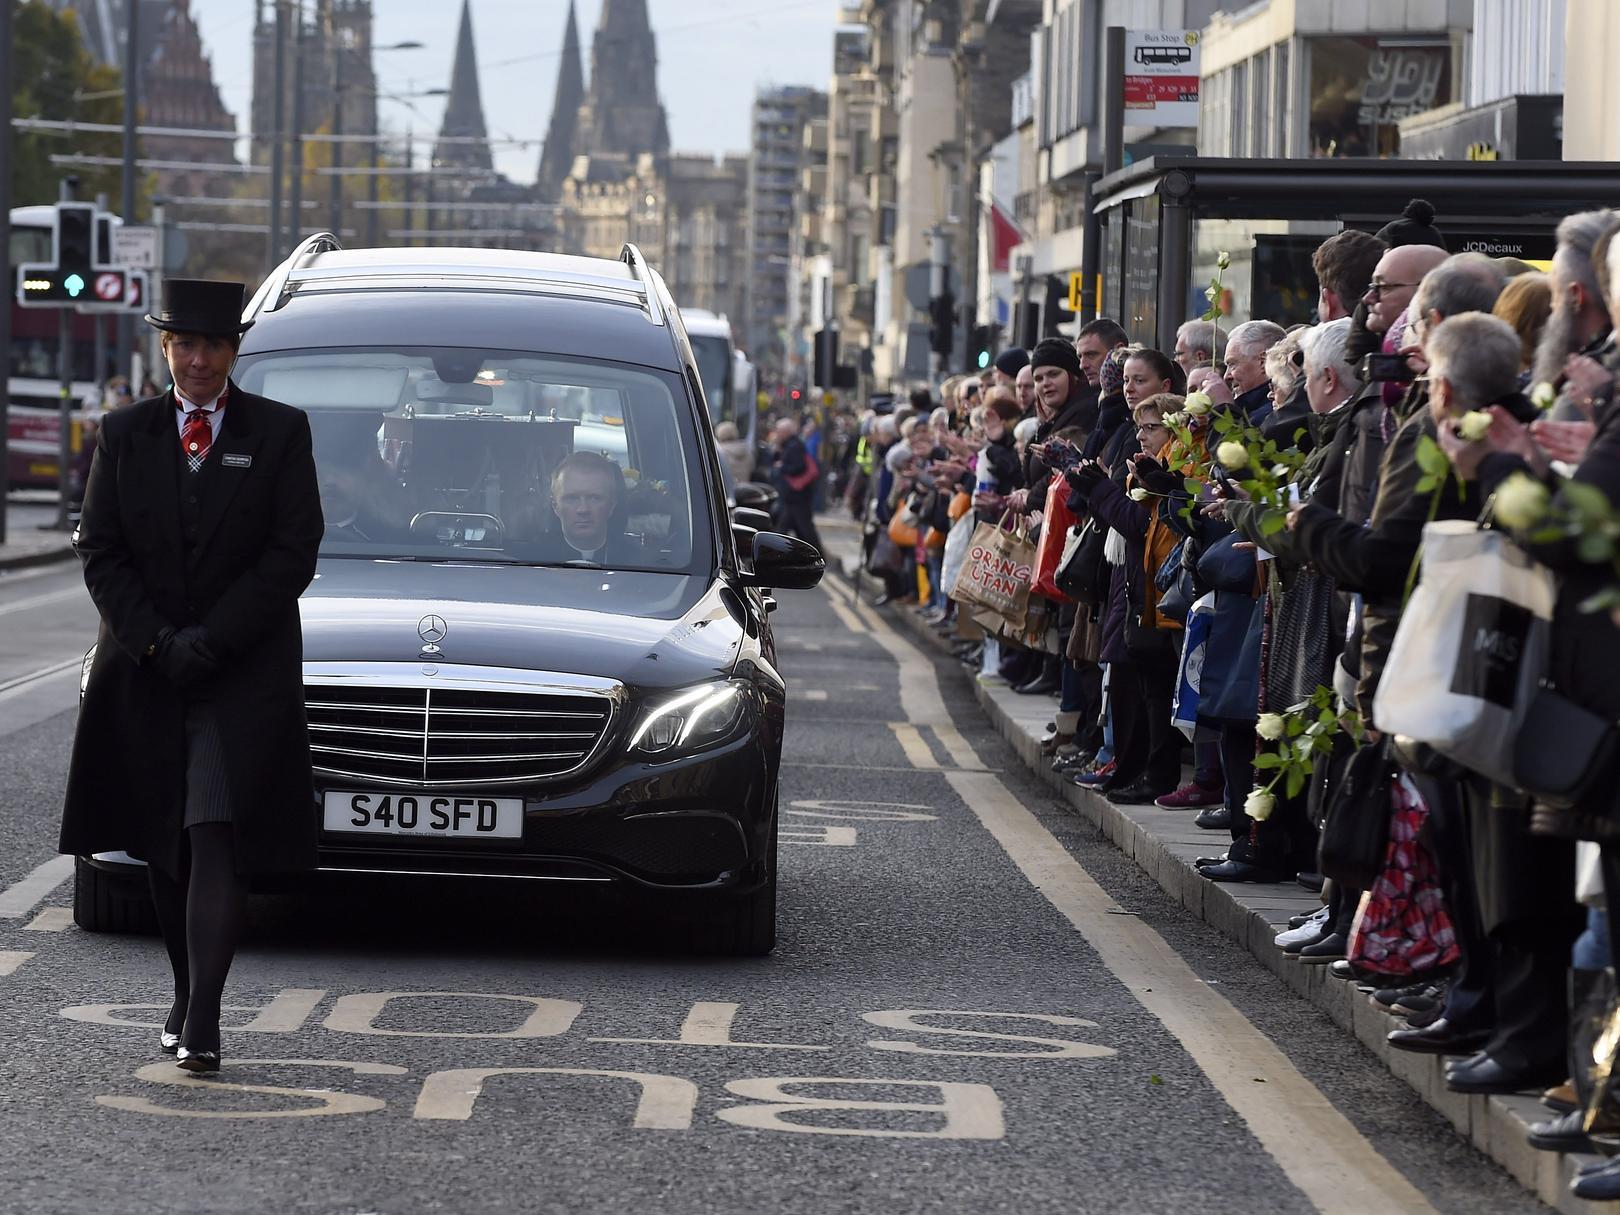 Hundreds lines Princes Street as the funeral cortege passed.